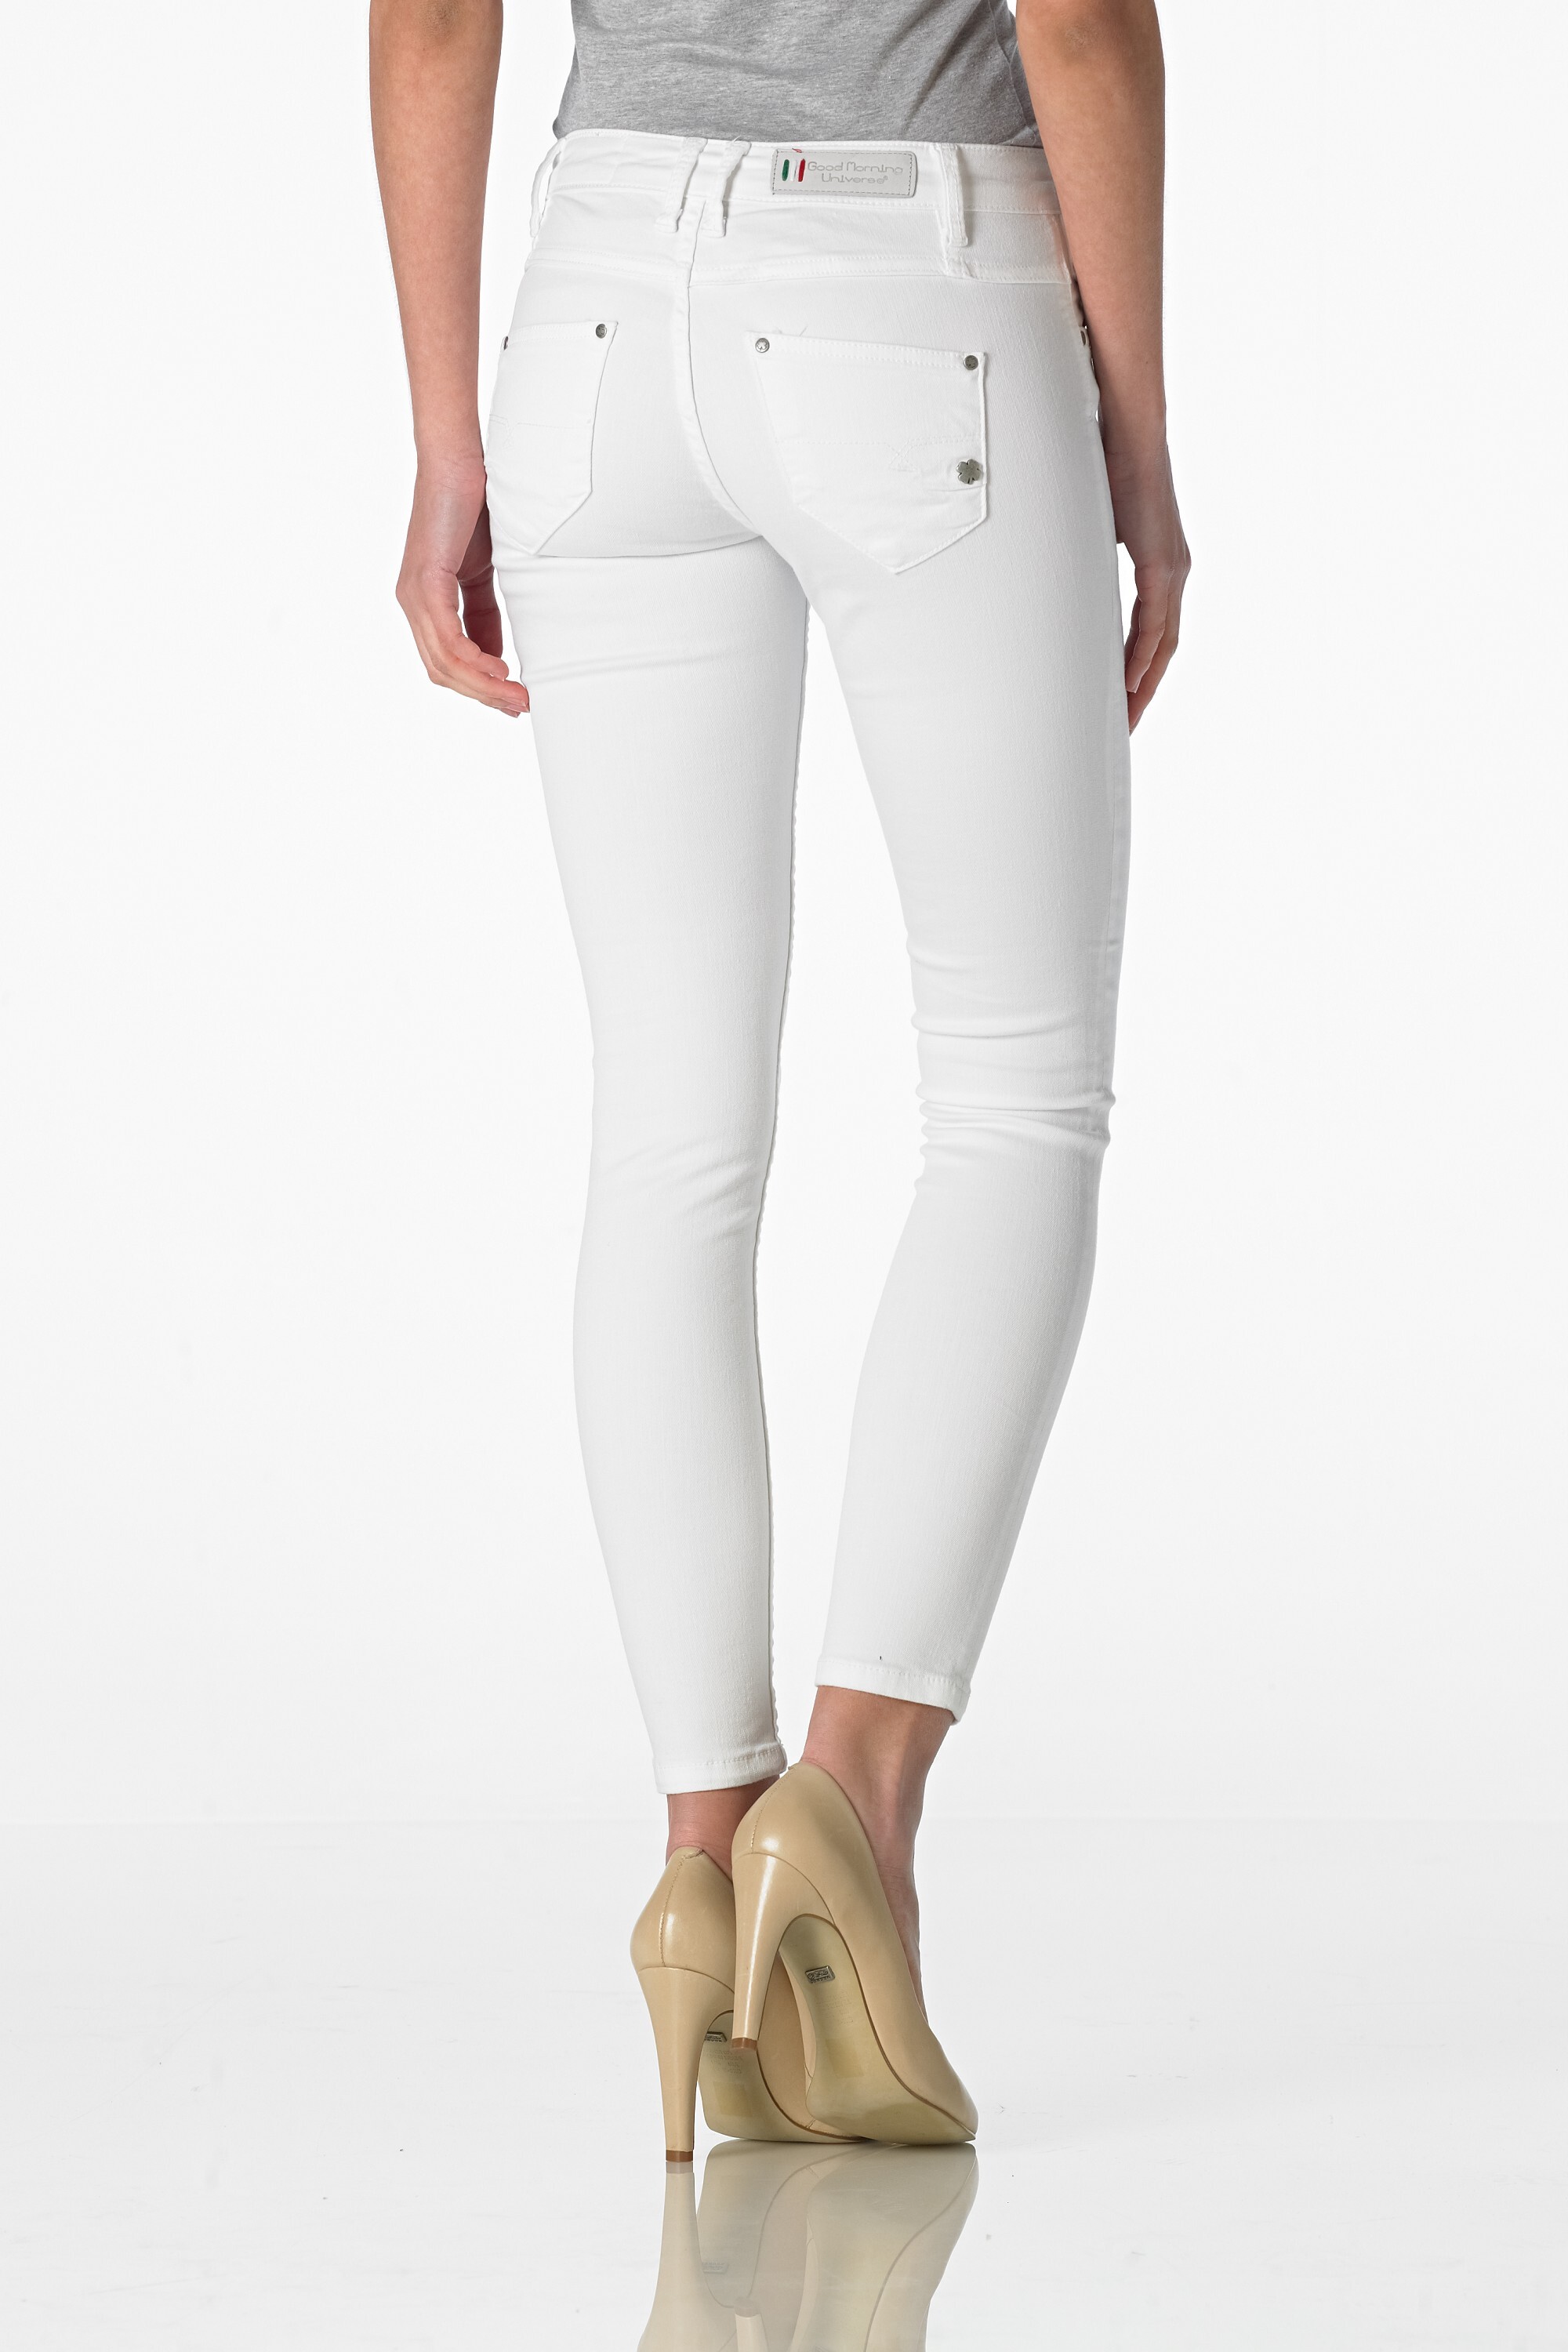 Lilly - Superslim (white cropped)